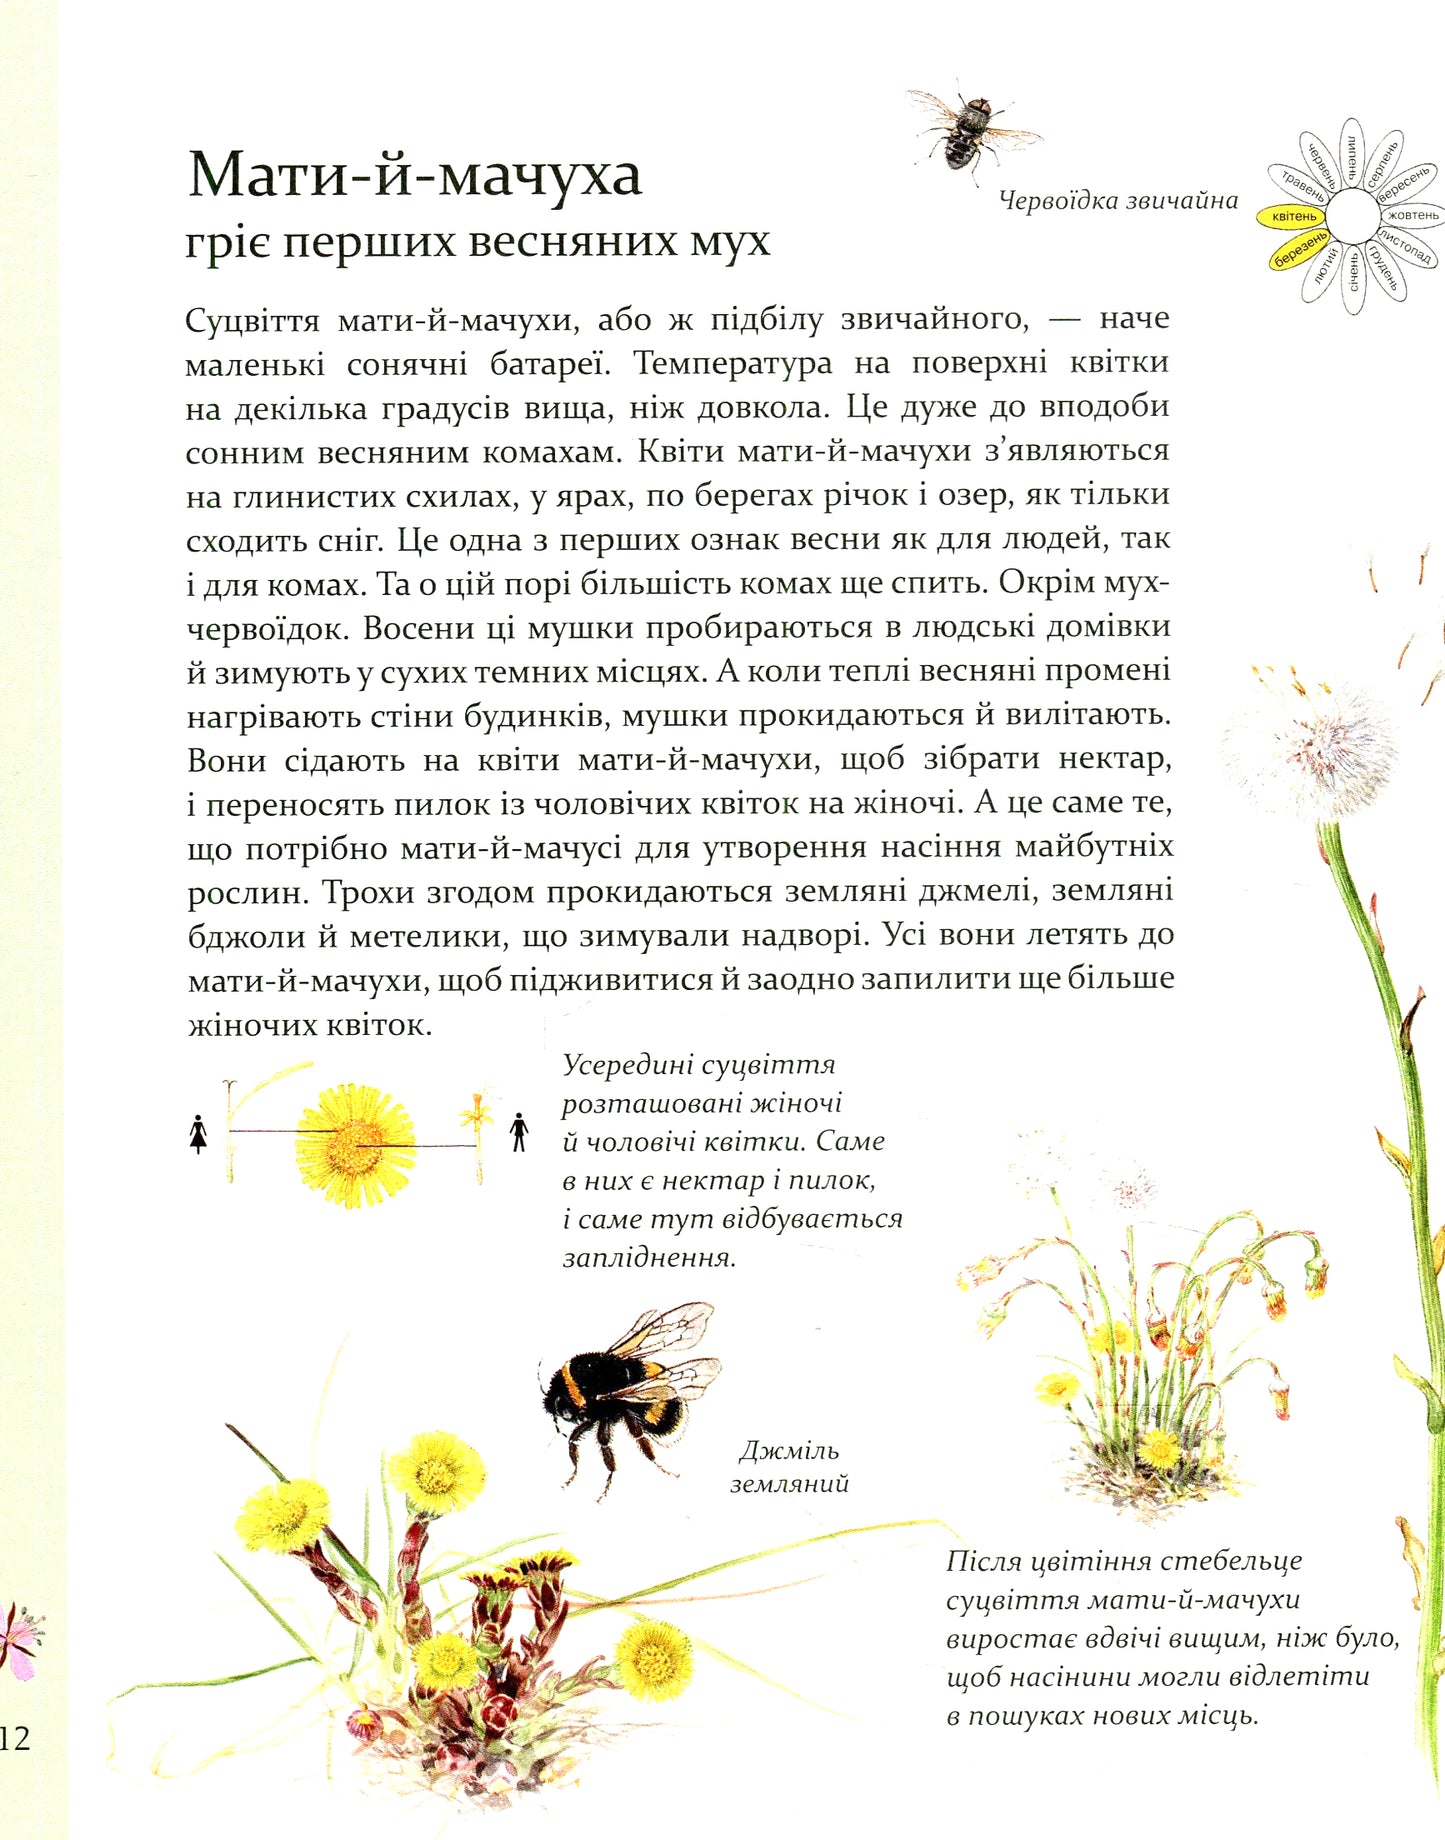 Expedition With Sophie The Ant / Експедиція з мурахою Софі Stefan Casta / Стефан Каста 9789669152572-14